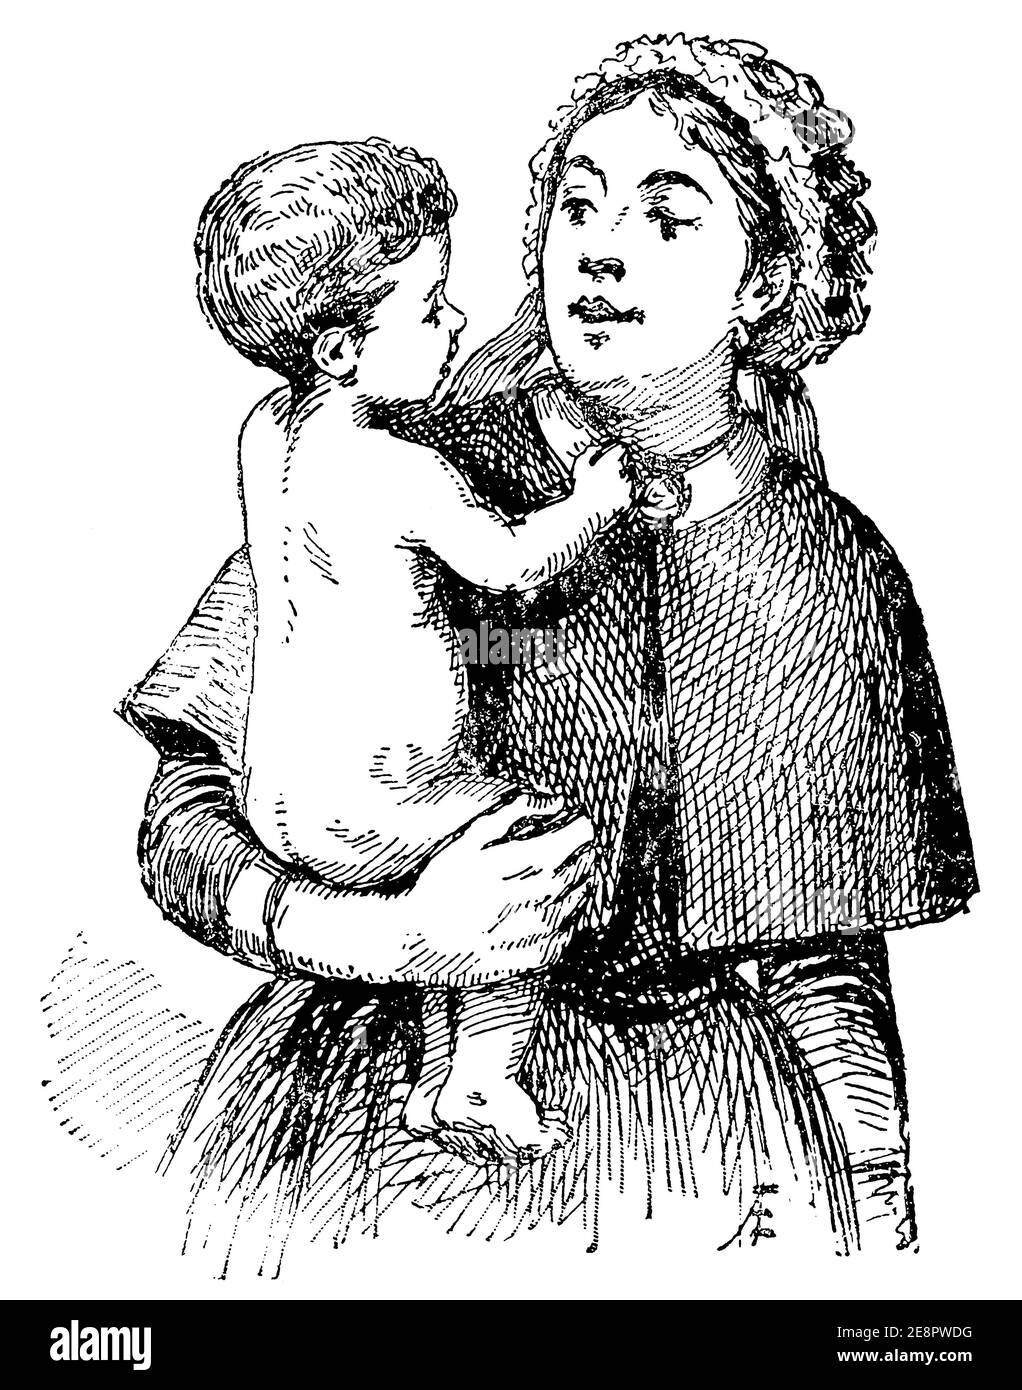 How to carry the child. Illustration of the 19th century. Germany. White background. Stock Photo